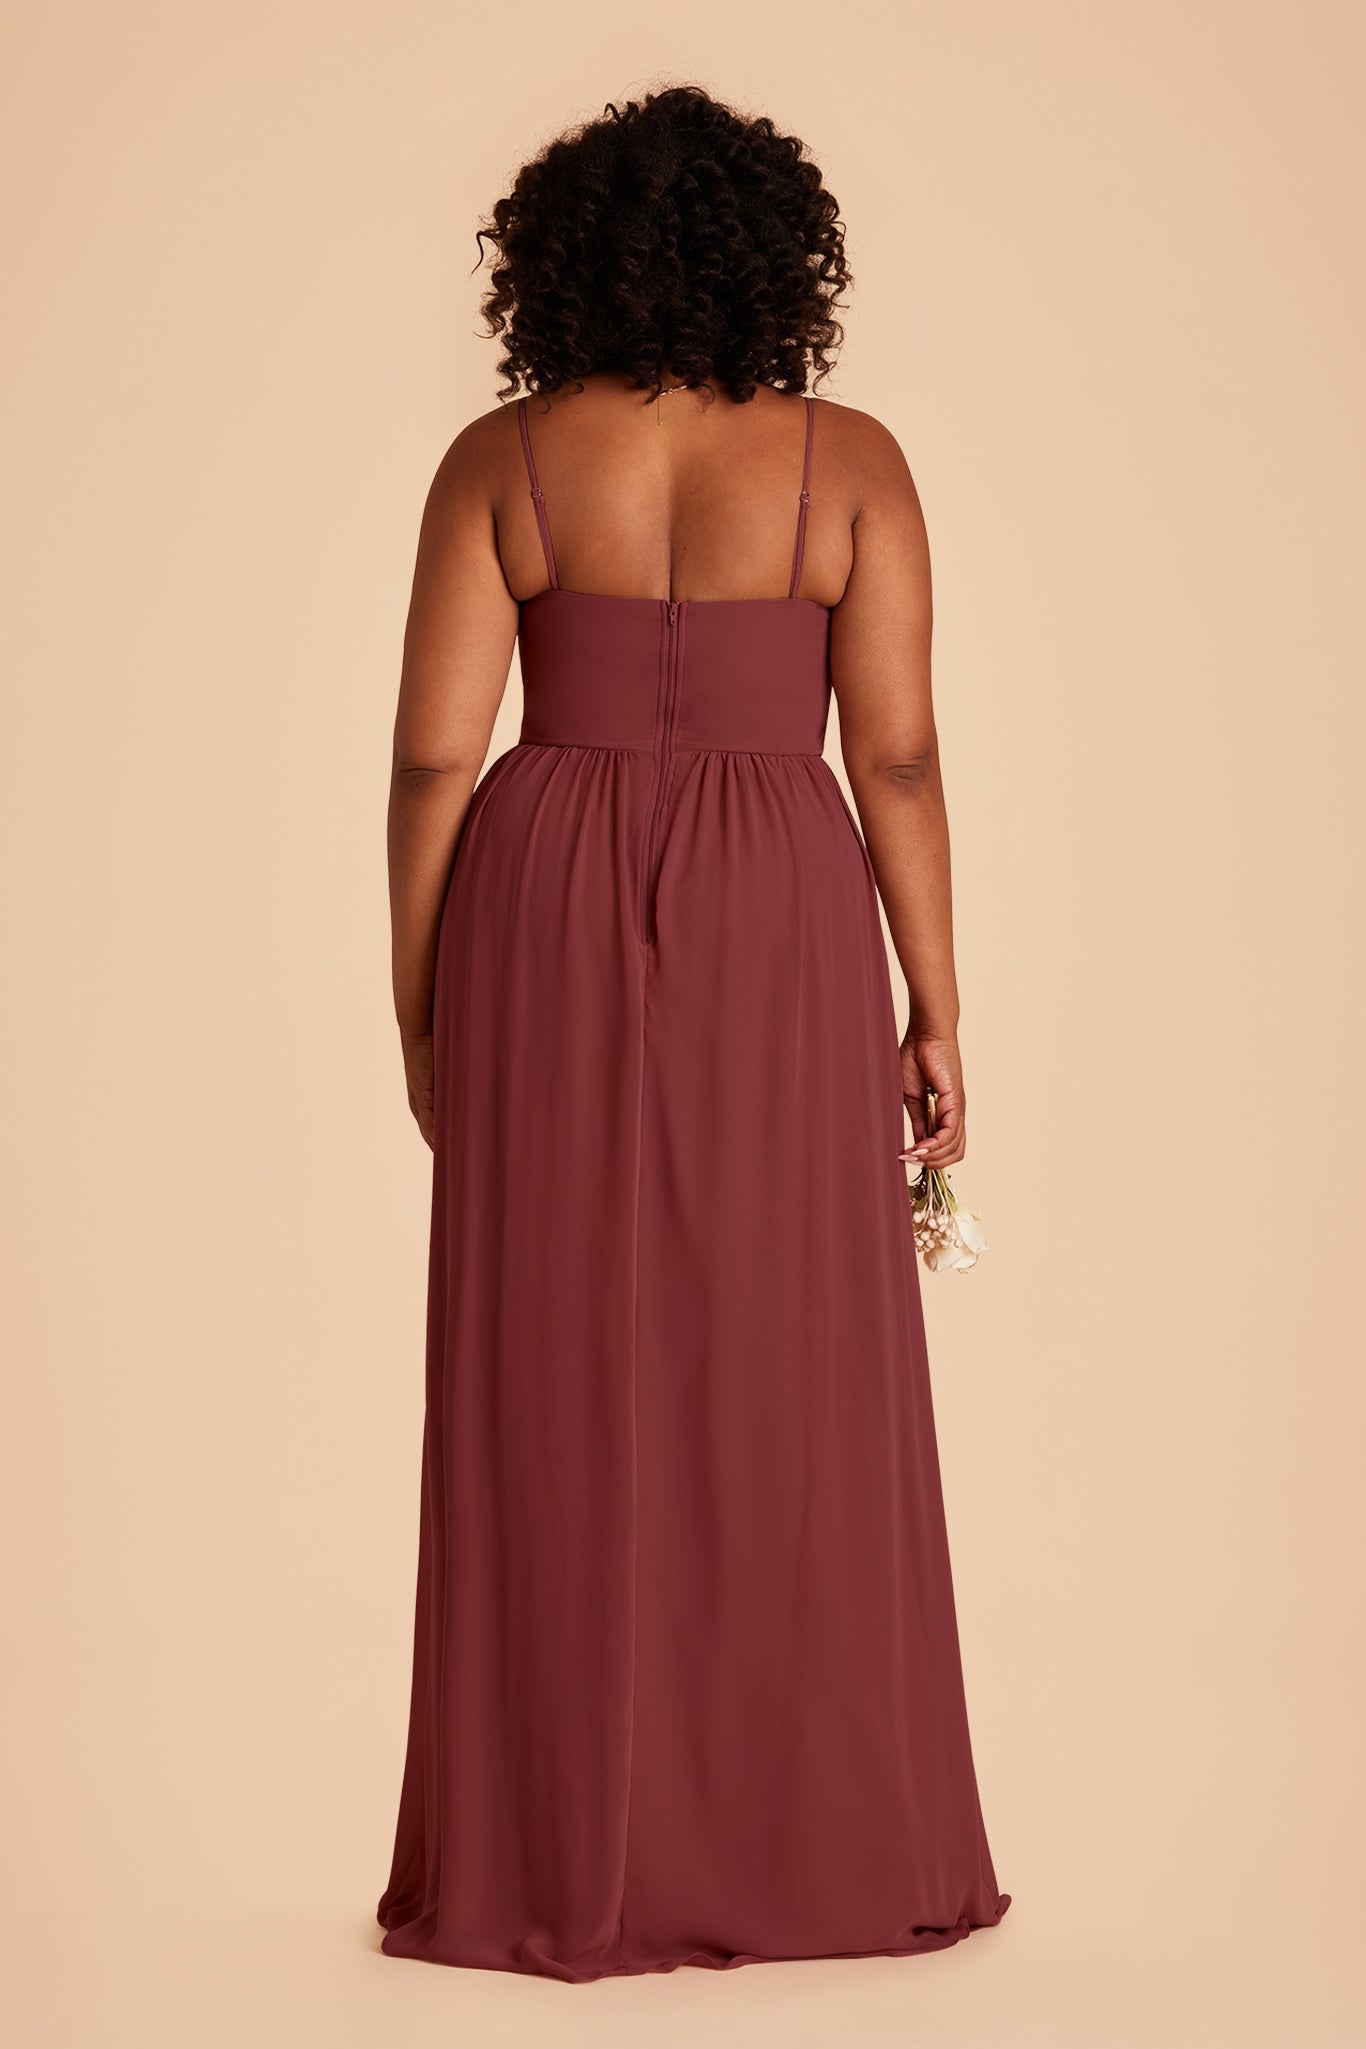 August plus size bridesmaid dress with slit in rosewood chiffon by Birdy Grey, back view